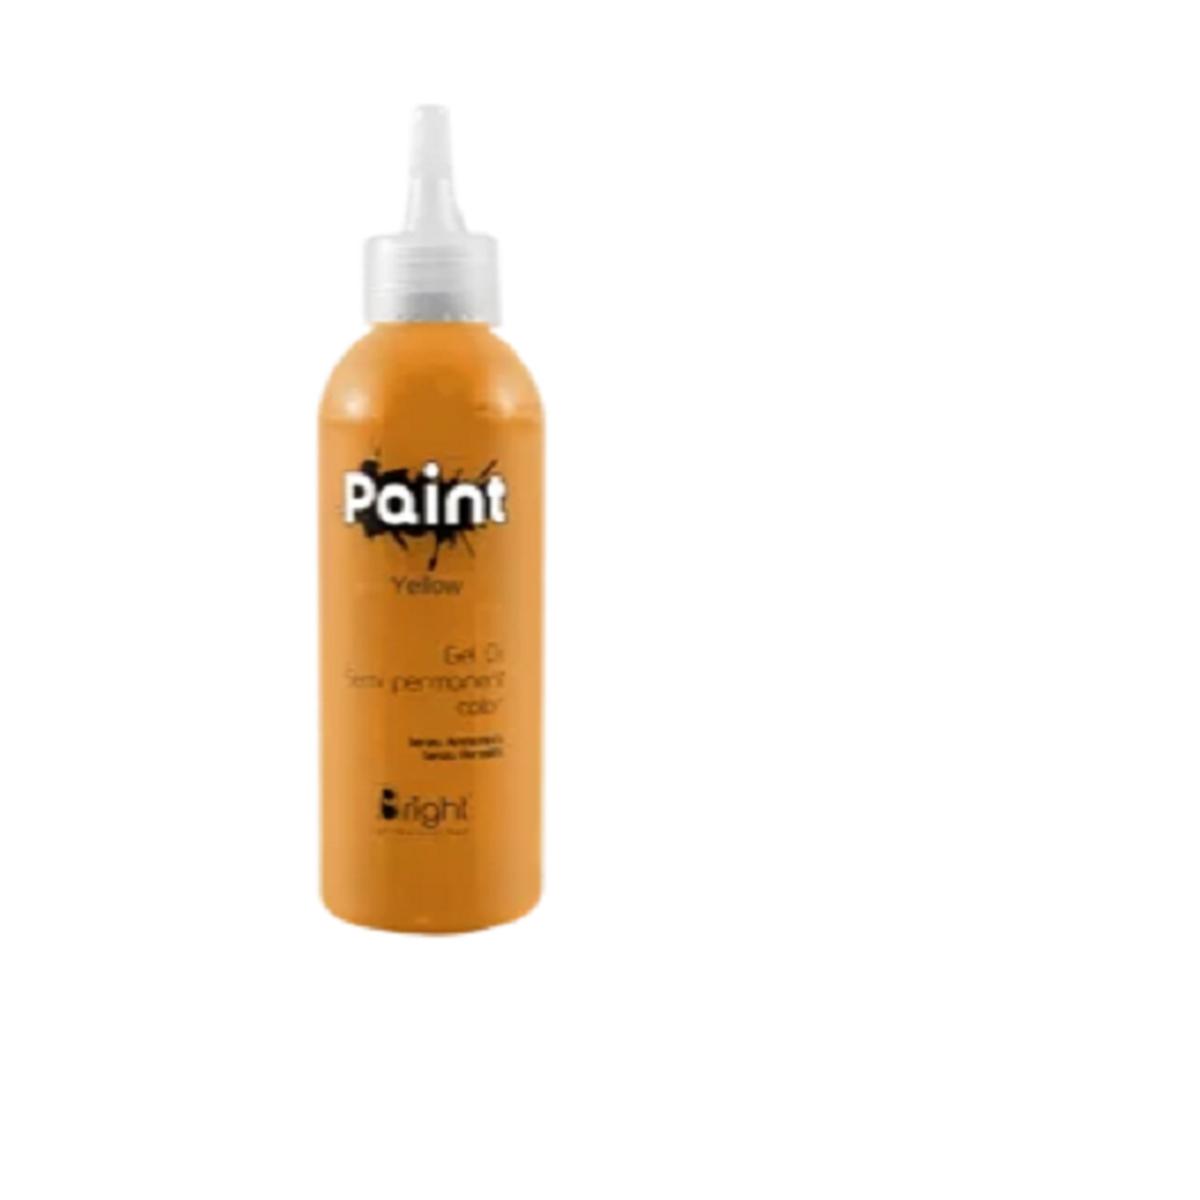 Bright - Paint Color Yellow 150 ml